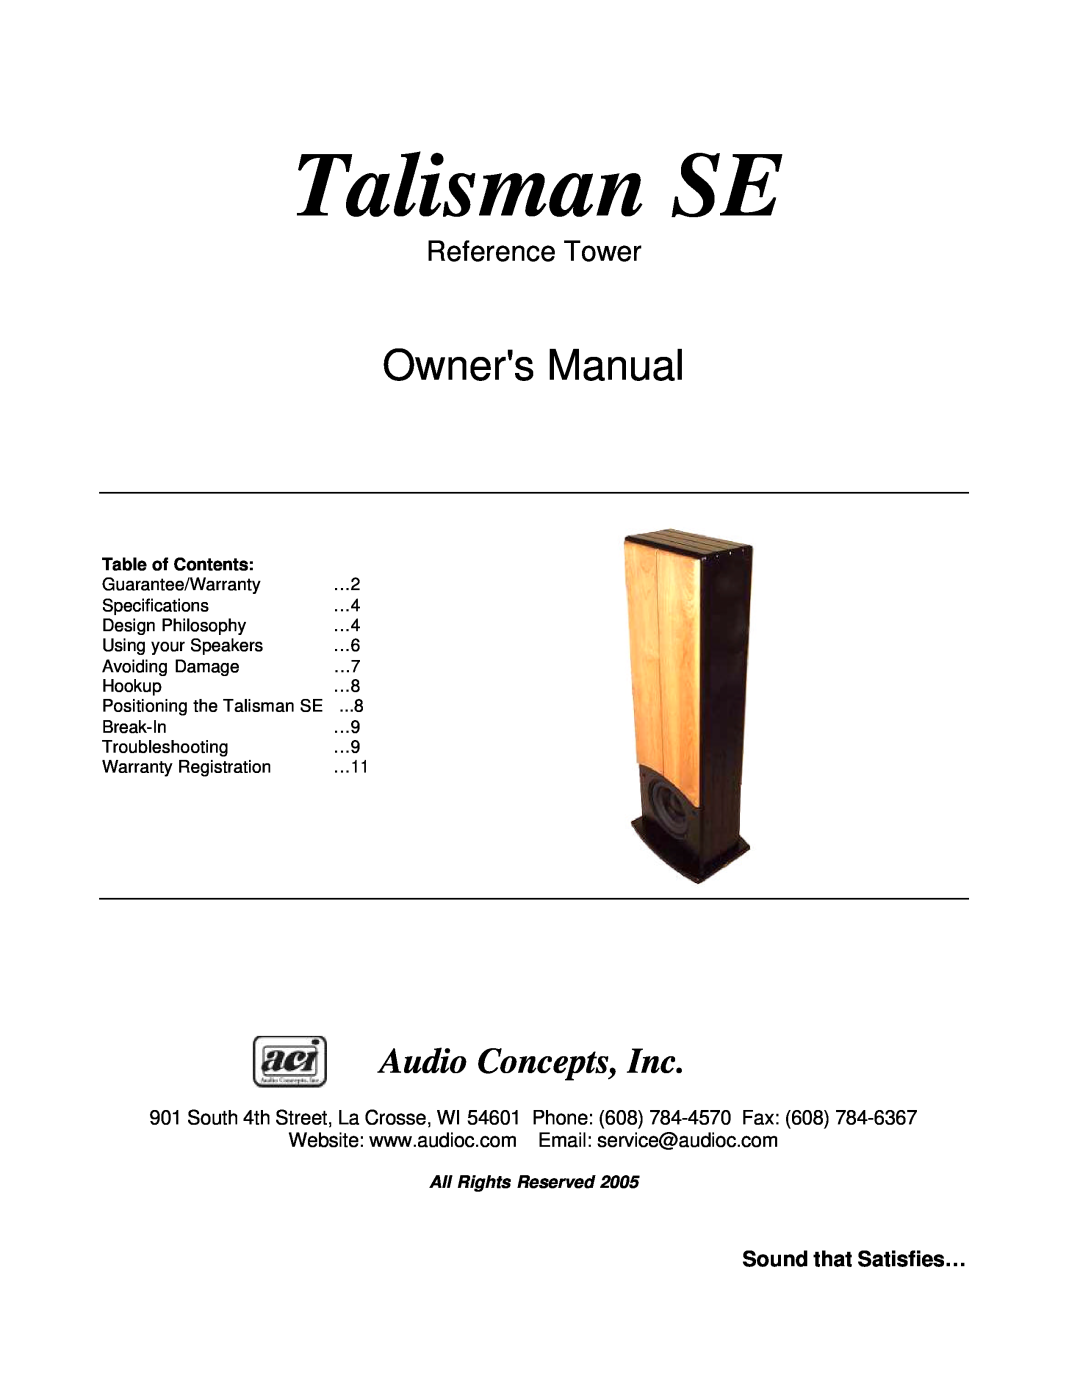 Talisman Designs SE Reference Tower owner manual Sound that Satisfies…, Talisman SE, Audio Concepts, Inc 